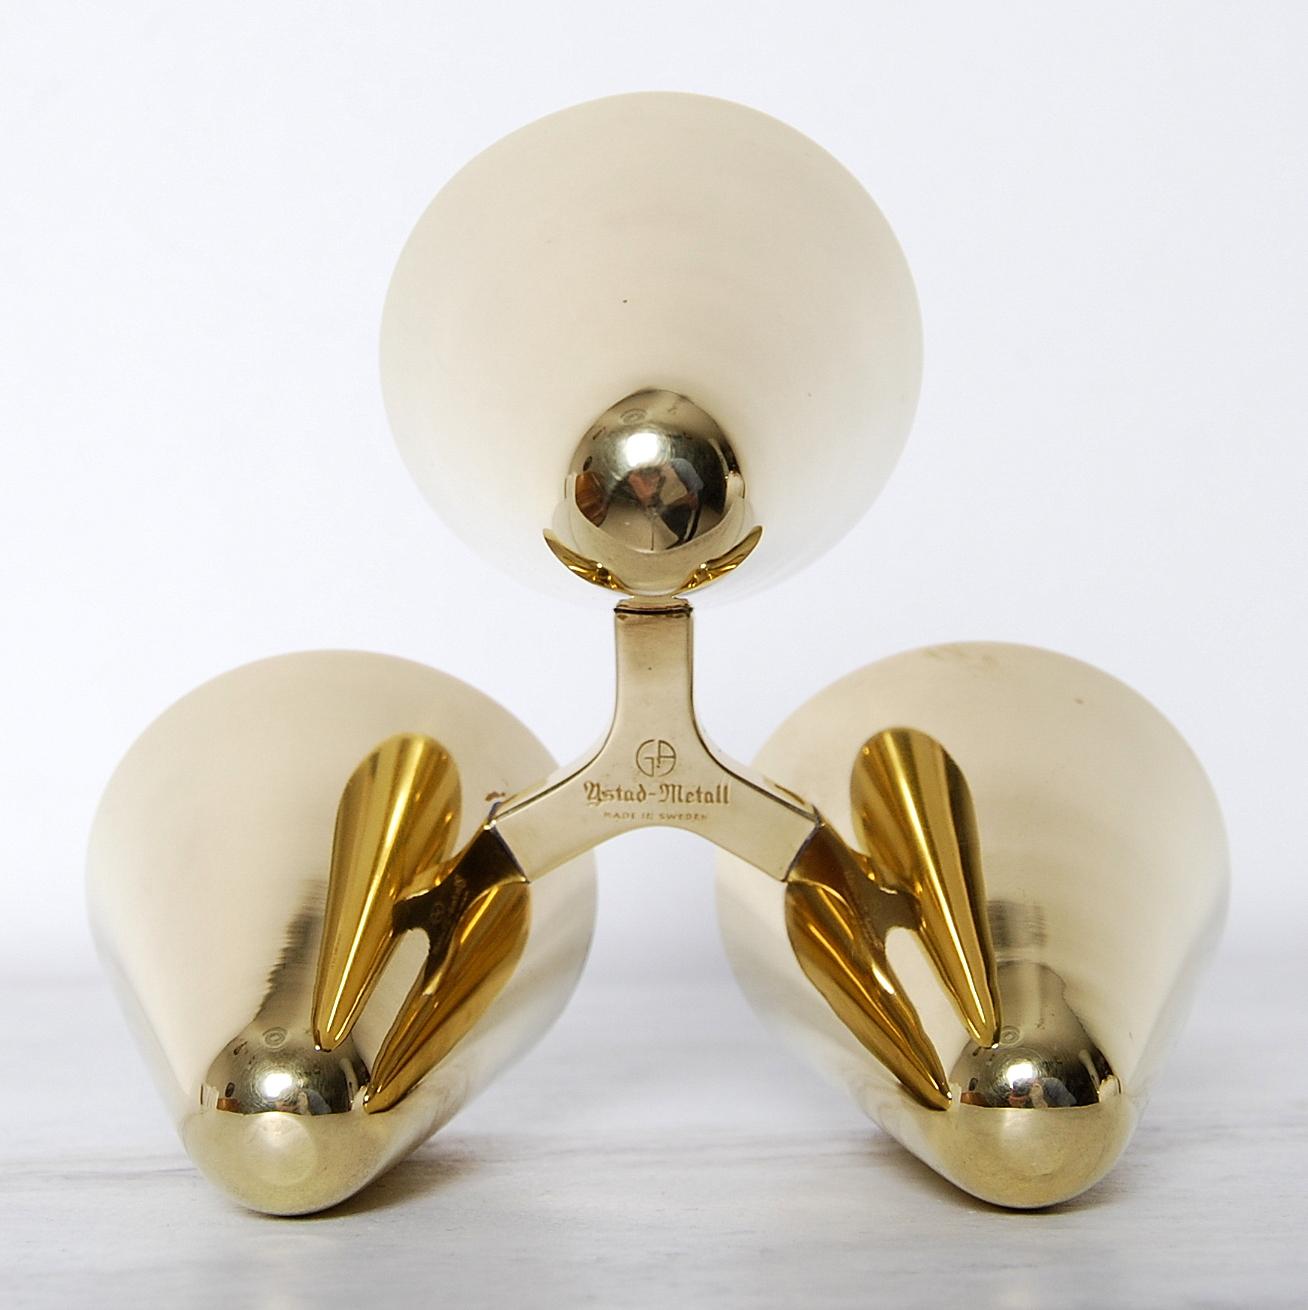 Rare Gunnar Ander Candleholder for Ystad Metall in Brass In Good Condition For Sale In Stockholm, SE